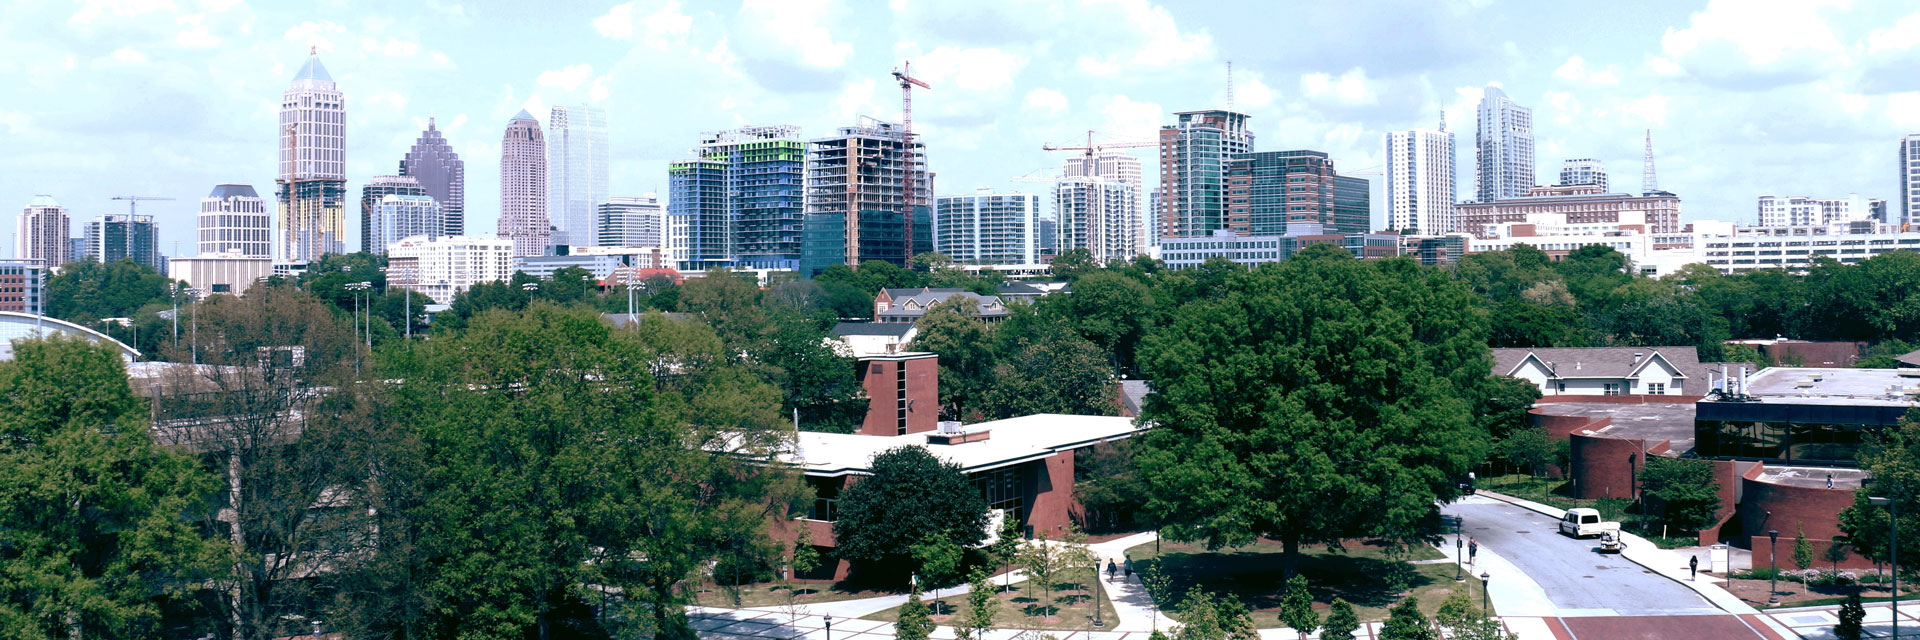 School with Atlanta in the background